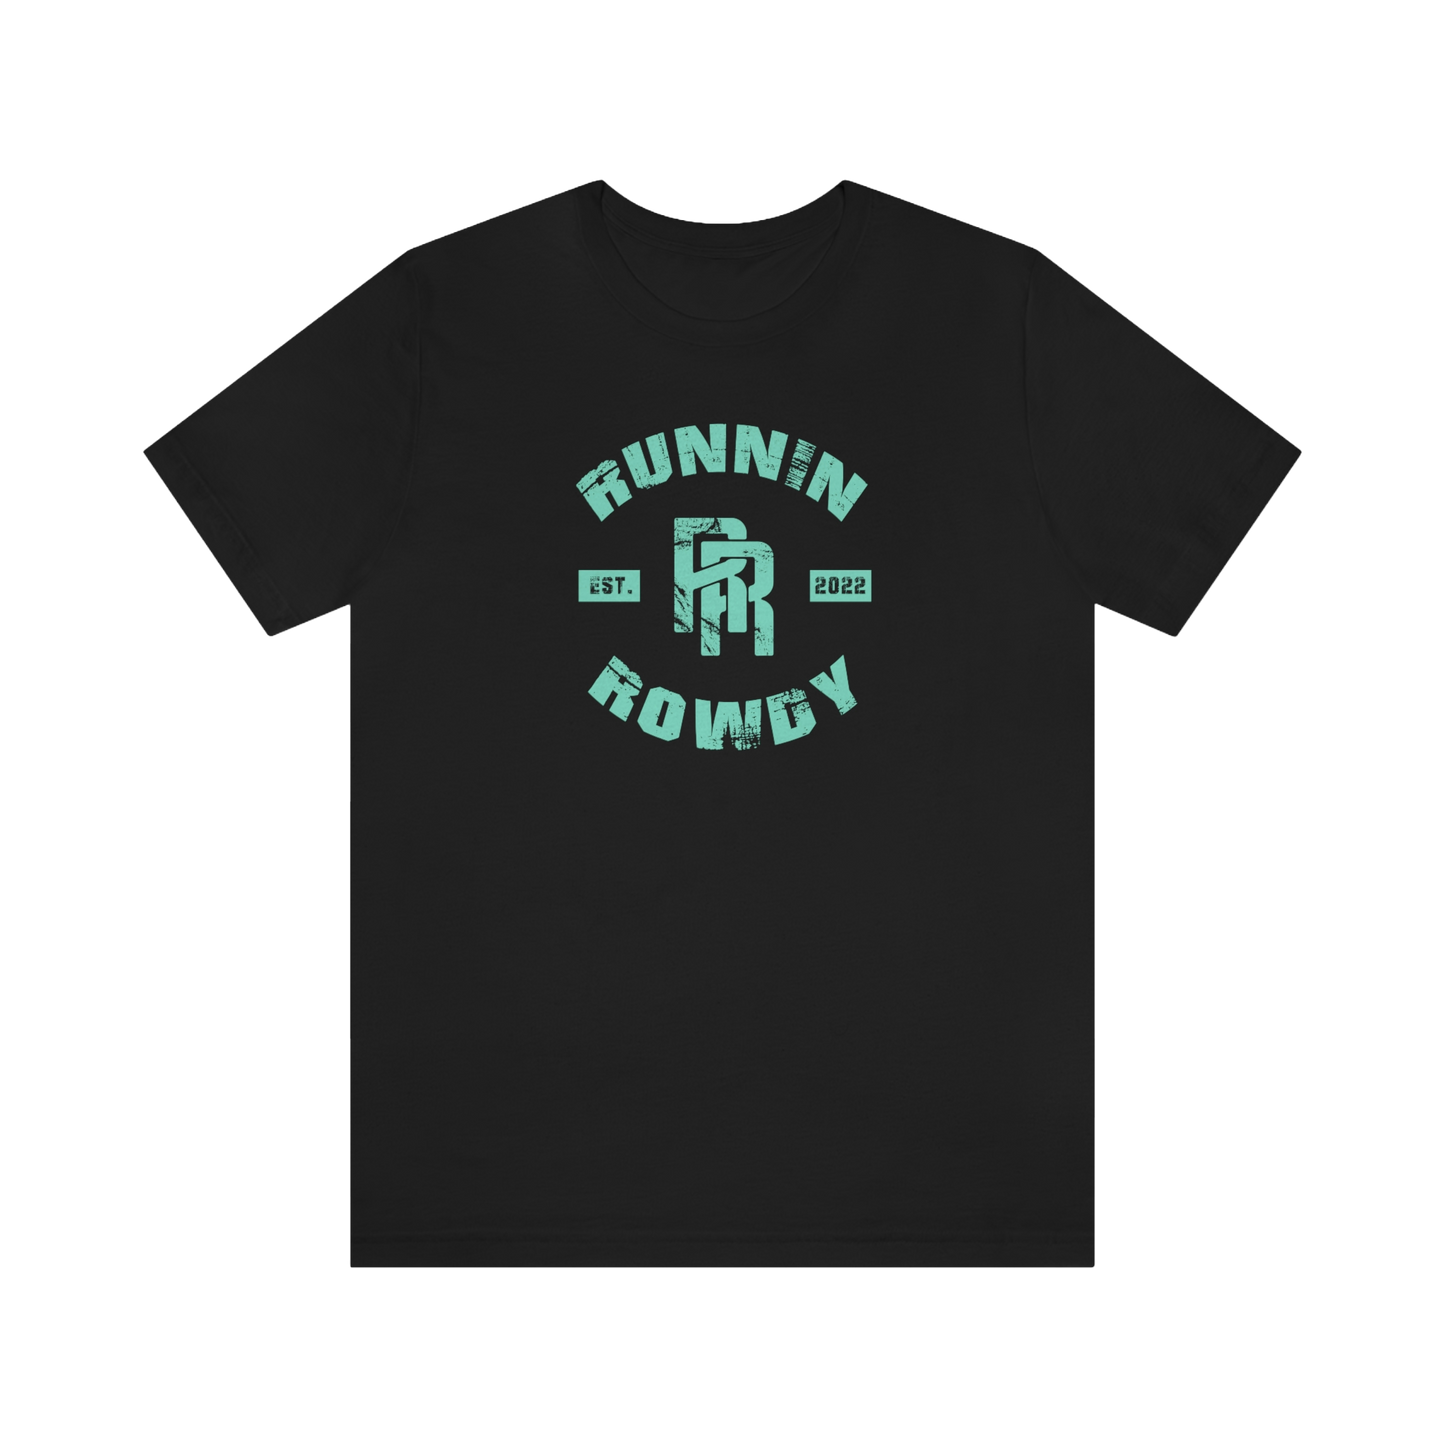 Black t-shirt with Runnin Rowdy text and logo in middle in teal colored writing